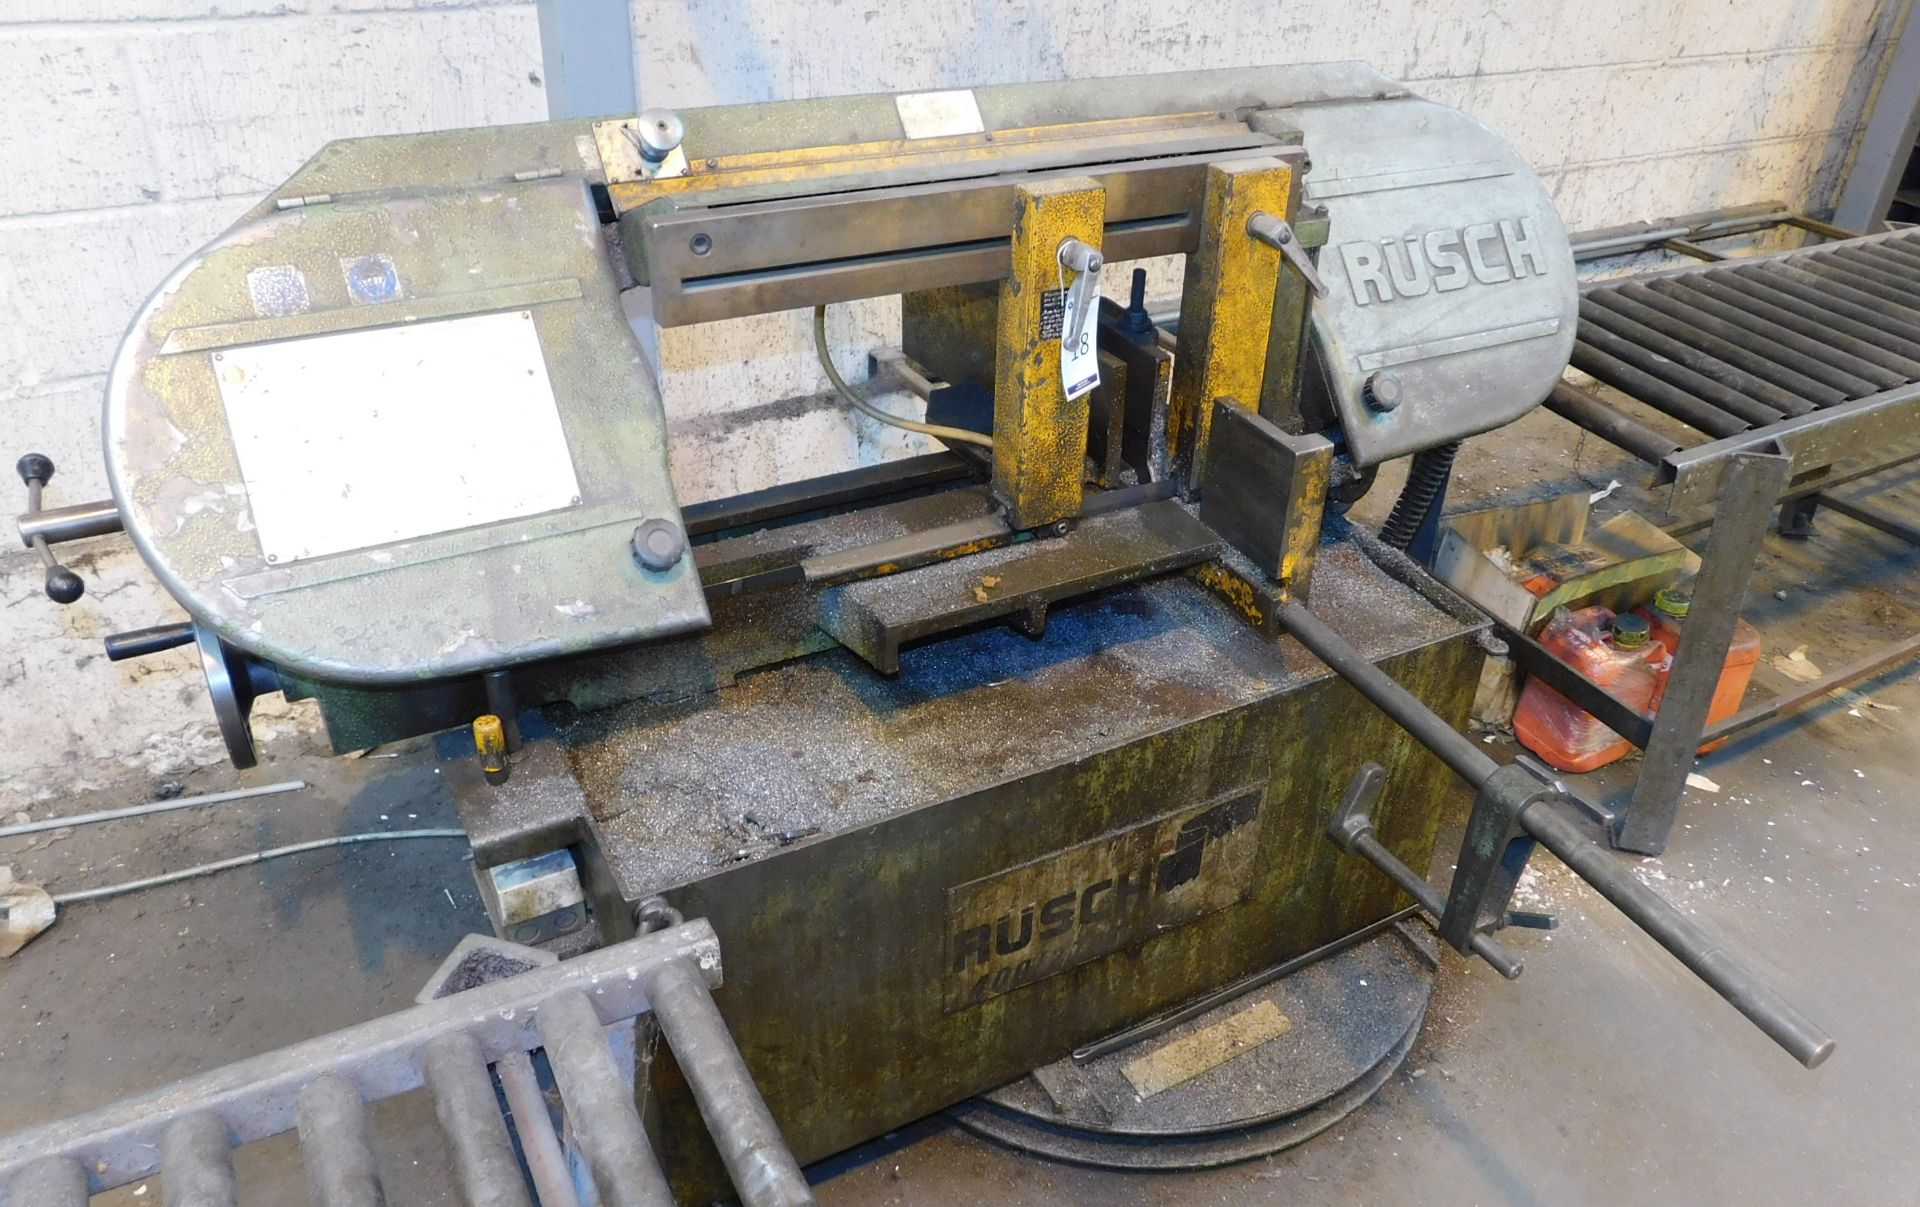 Rusch 400/270g Horizontal Metal Cutting Bandsaw, s/n G920715 with Turntable & Feed/Delivery Roller - Image 2 of 4